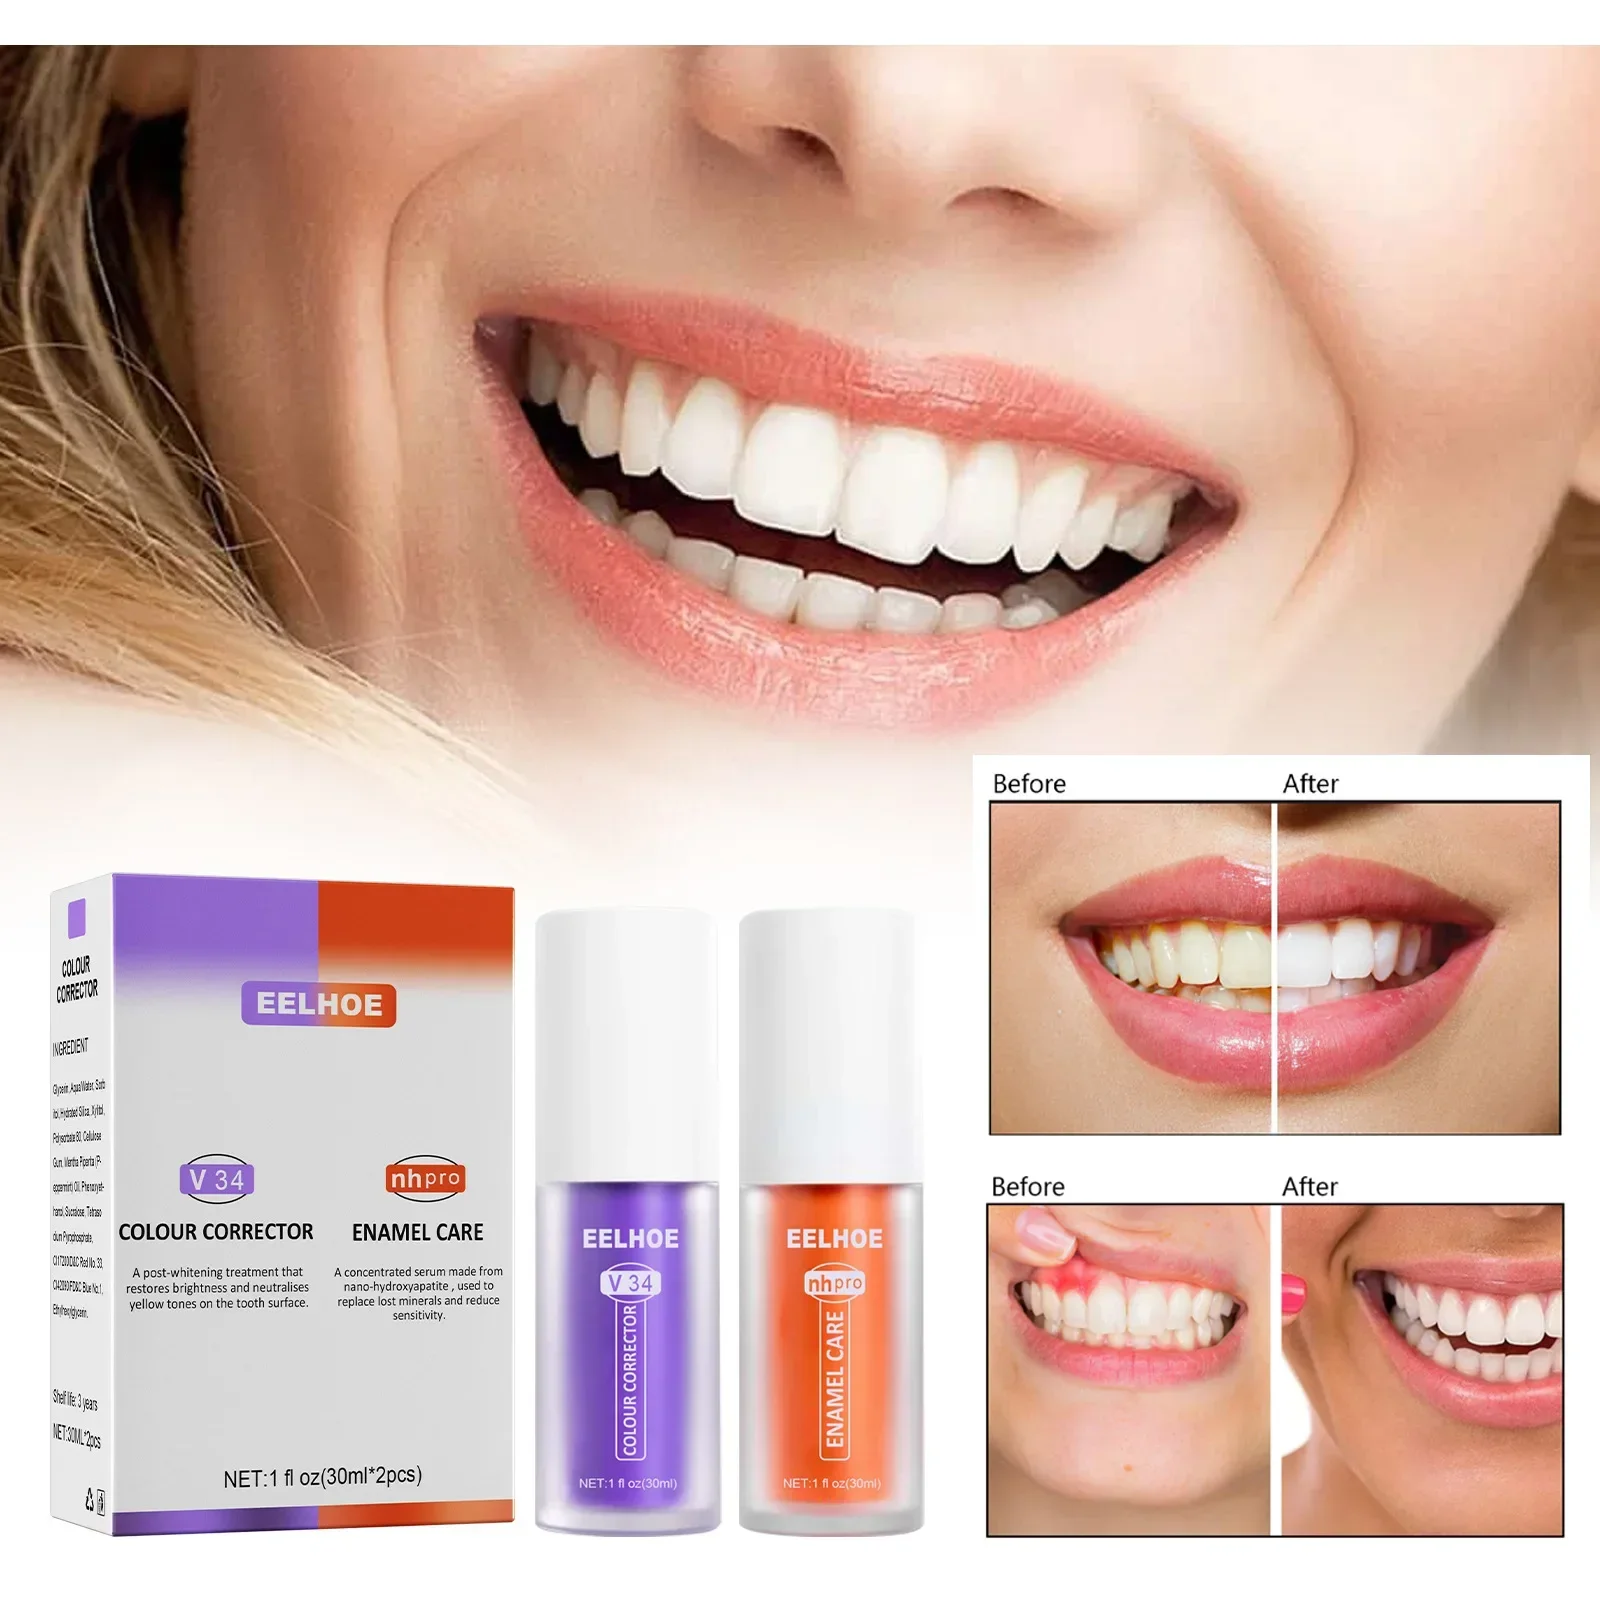 

2pcs V34 Toothpaste Purple Orange Whitening Tooth Toothpaste Teeth Repairs Oral Cleansing Brightening Stains Removing